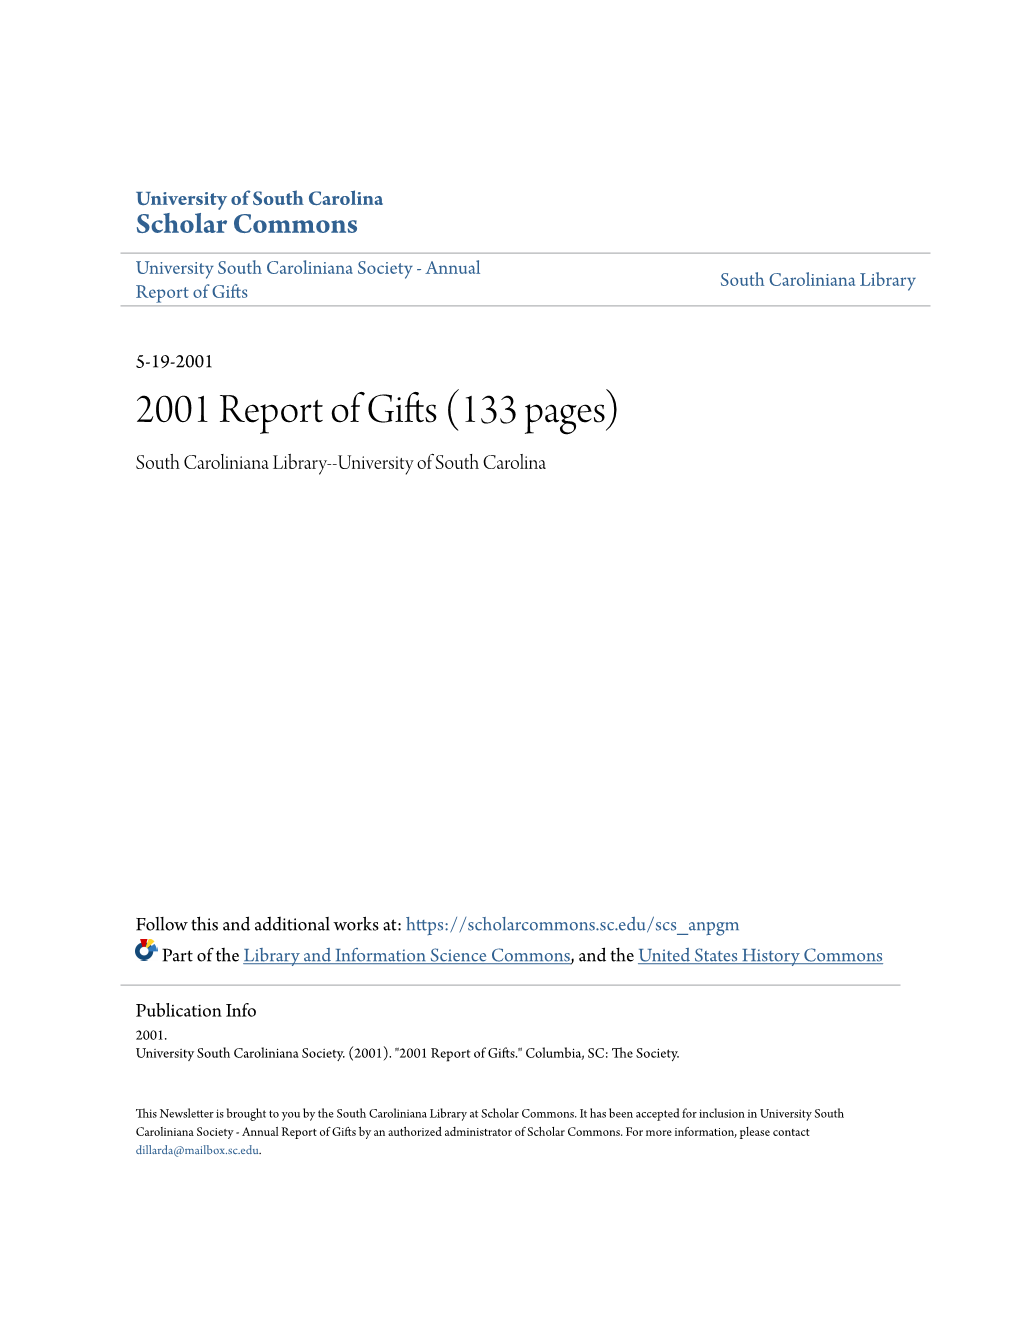 2001 Report of Gifts (133 Pages) South Caroliniana Library--University of South Carolina